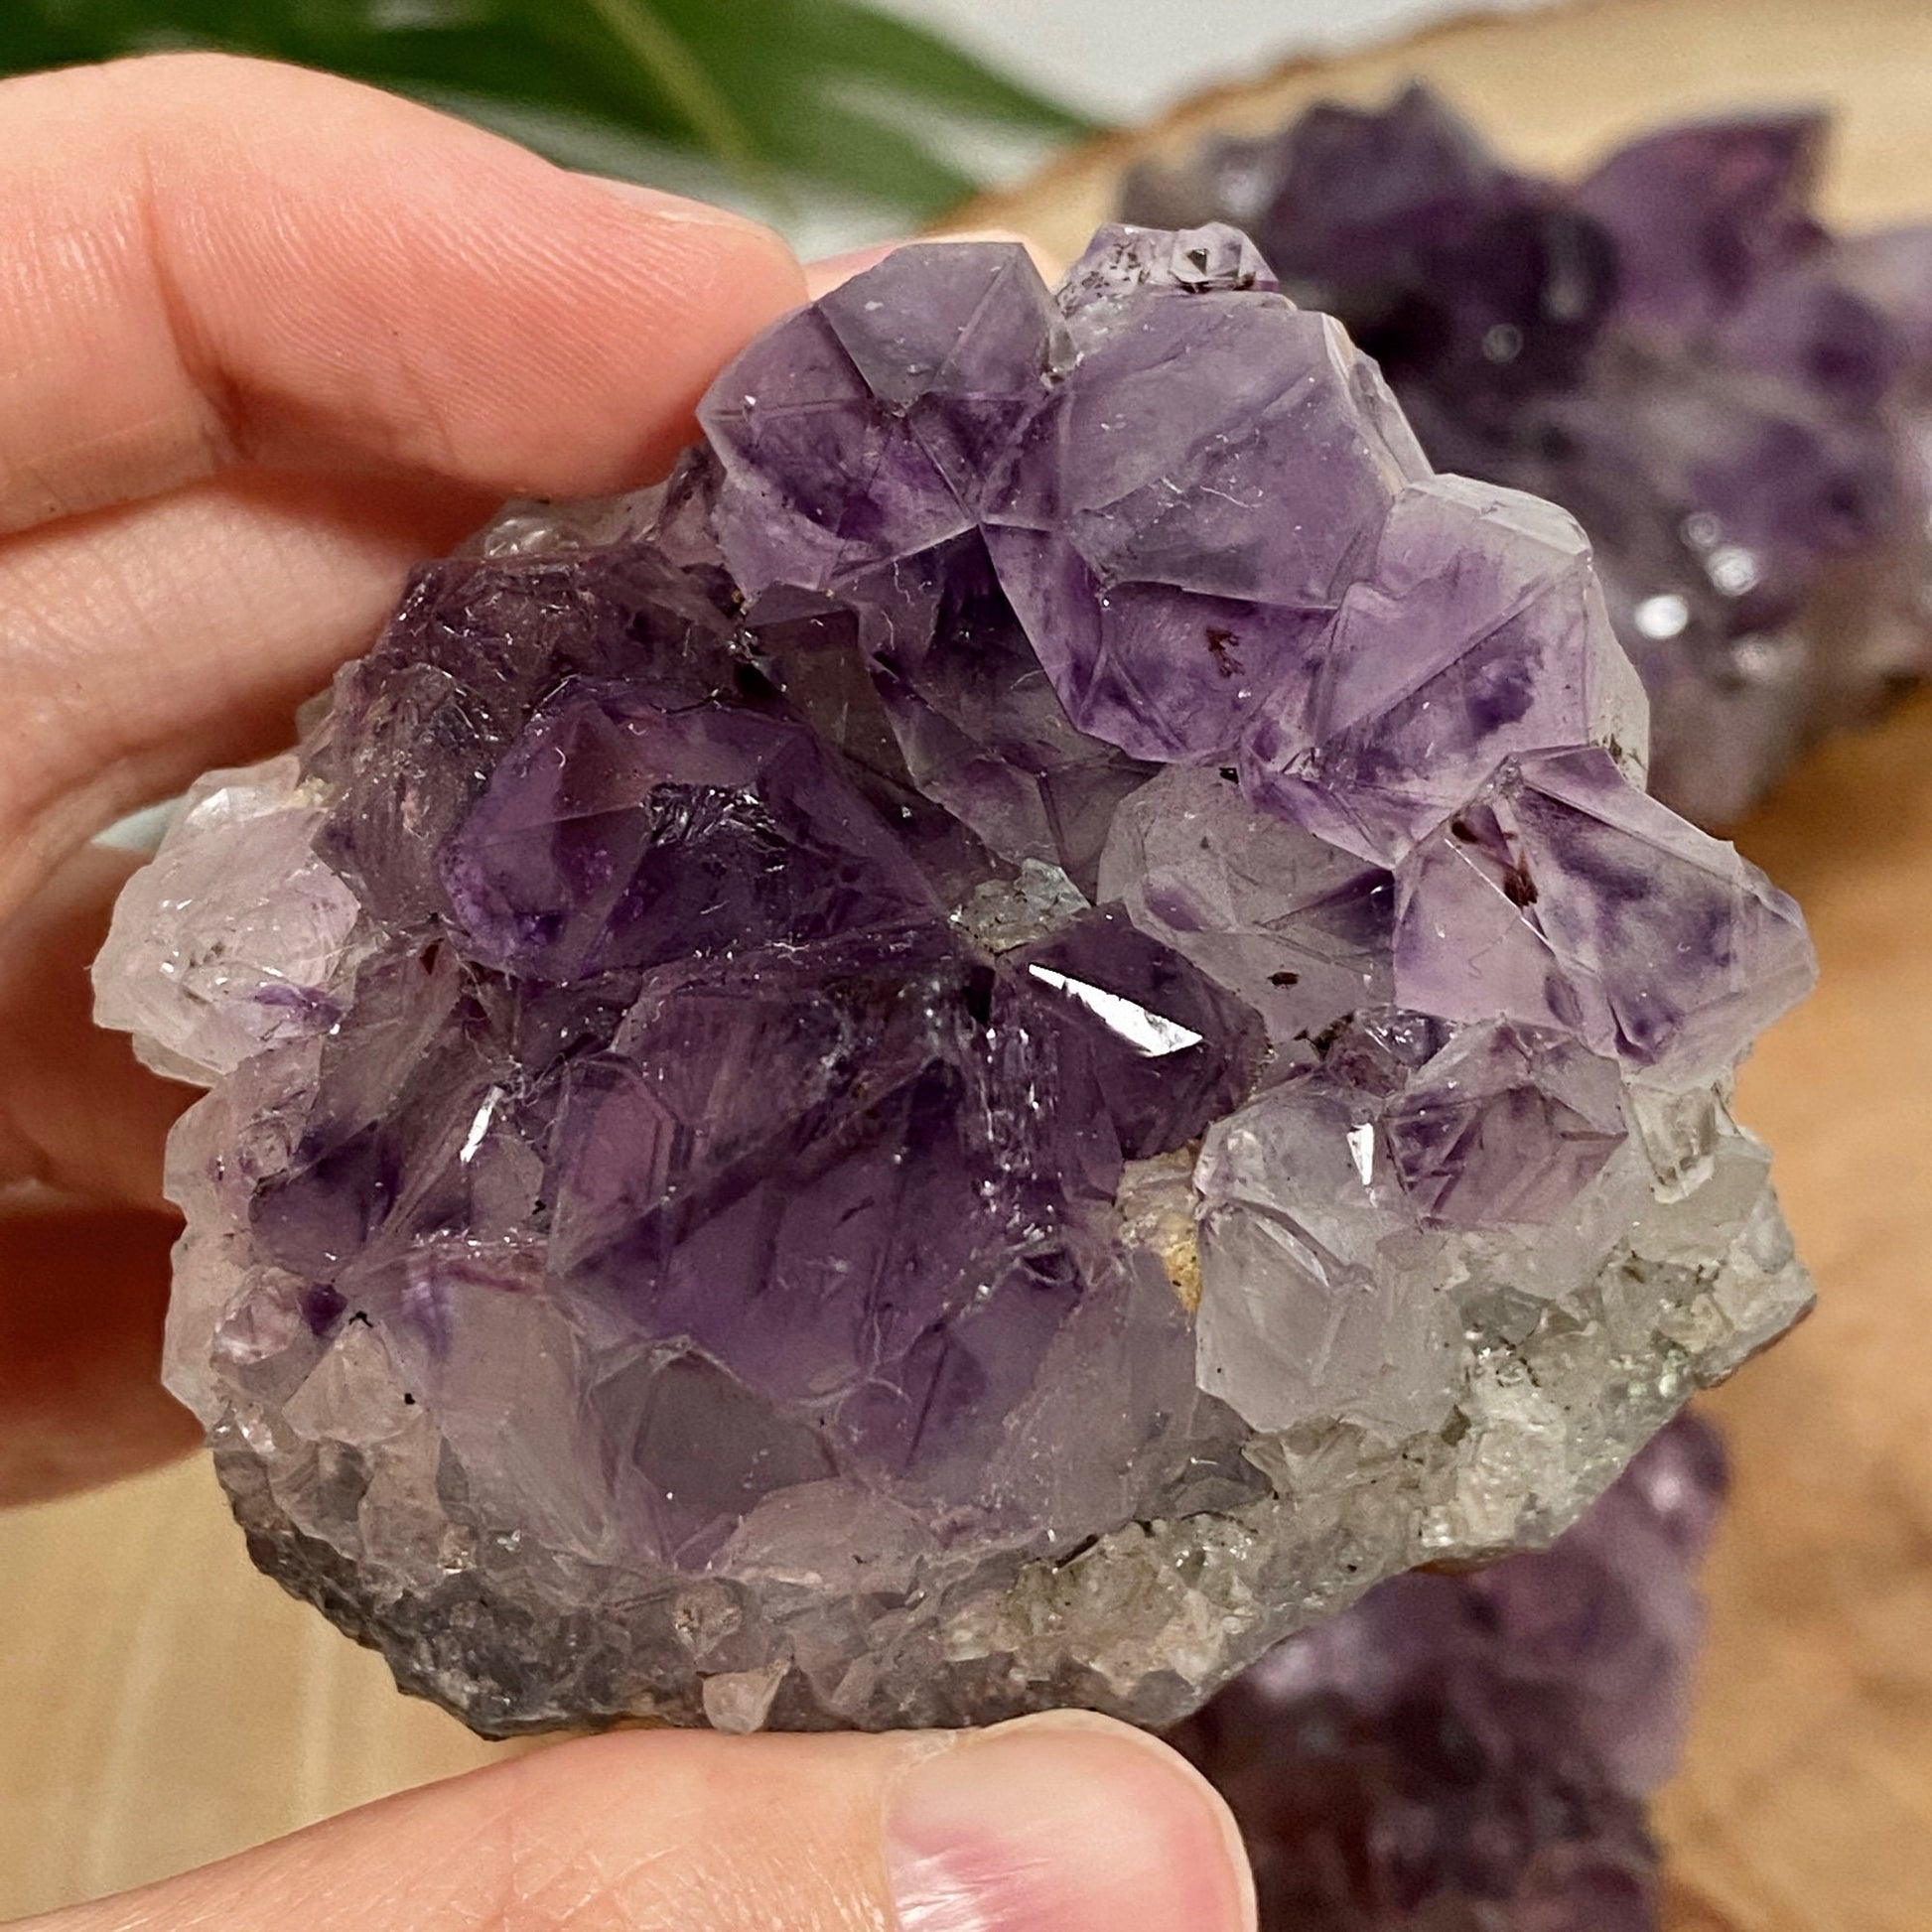 Raw Lilac Violet Amethyst (choose your size) - Lavender Amethyst Druzy from Brazil - Genuine Rough Geode for Crystal Grids, Healing, Reiki